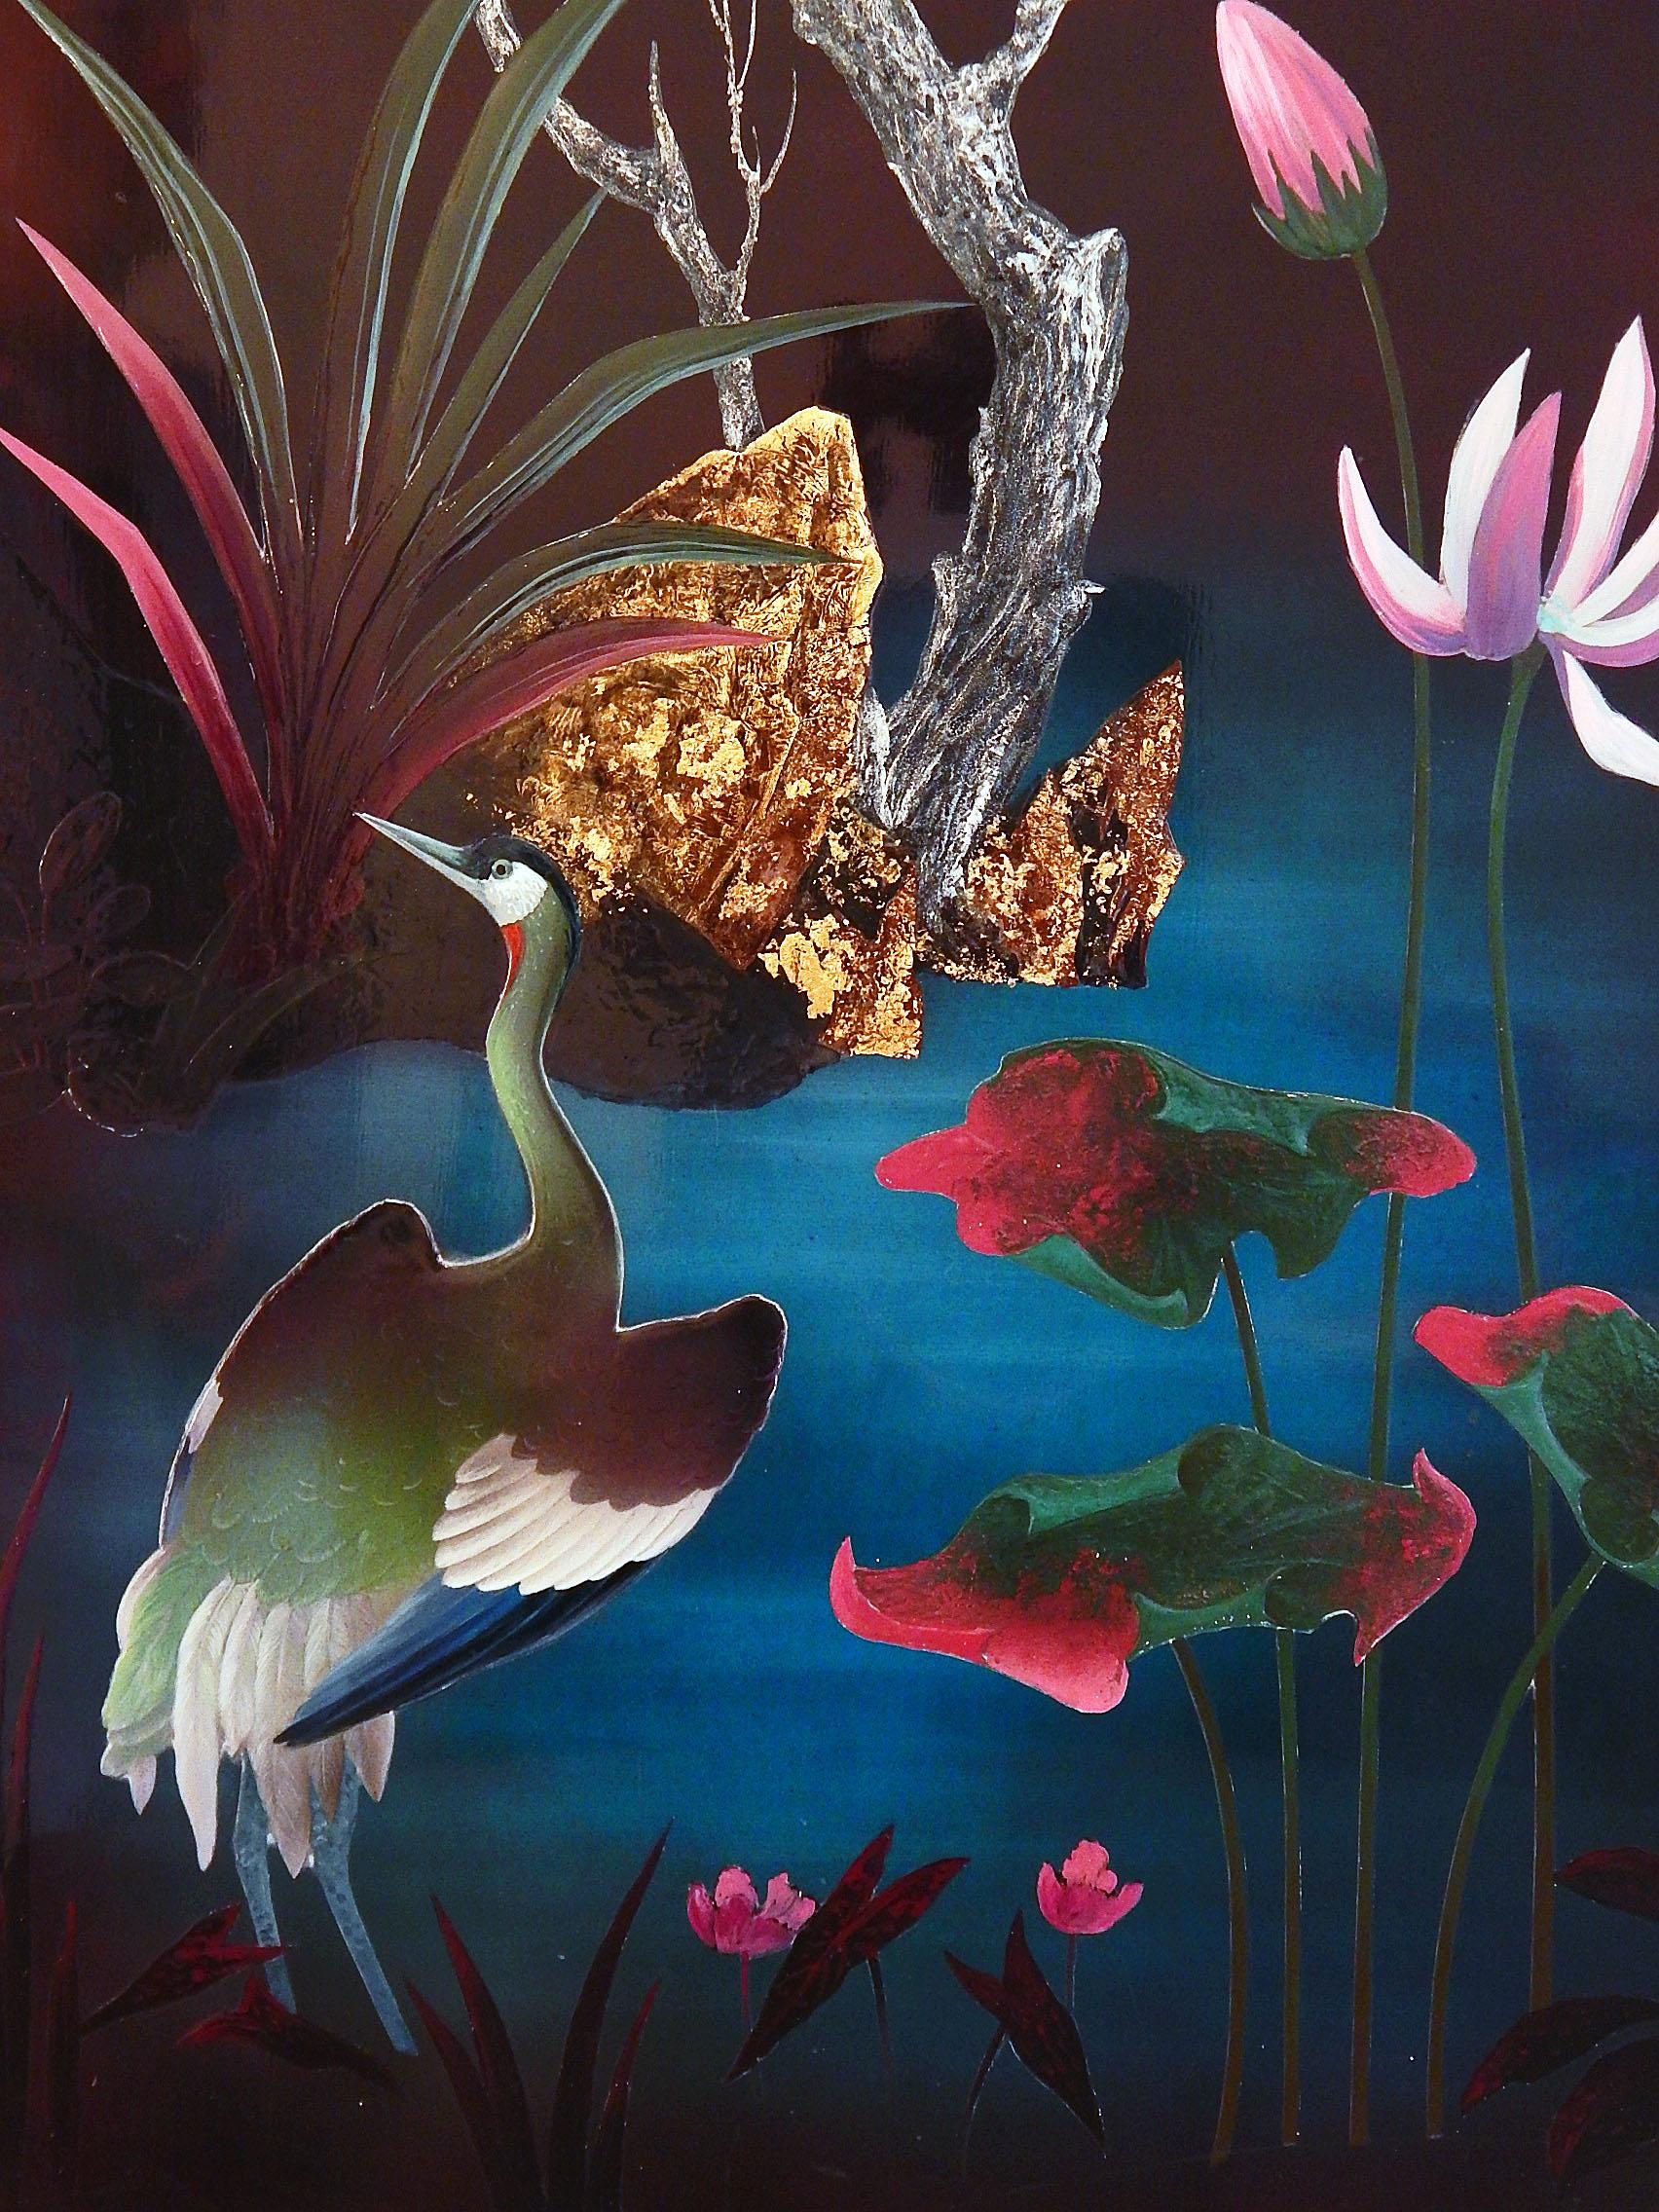 Influenced by the classic lacquer paintings of Jean Dunand and other great artists of France's Art Deco era, as well as the stylized landscapes of China and Japan, this glowing depiction of a heron amidst water lilies, a rose-hued tree and rocks